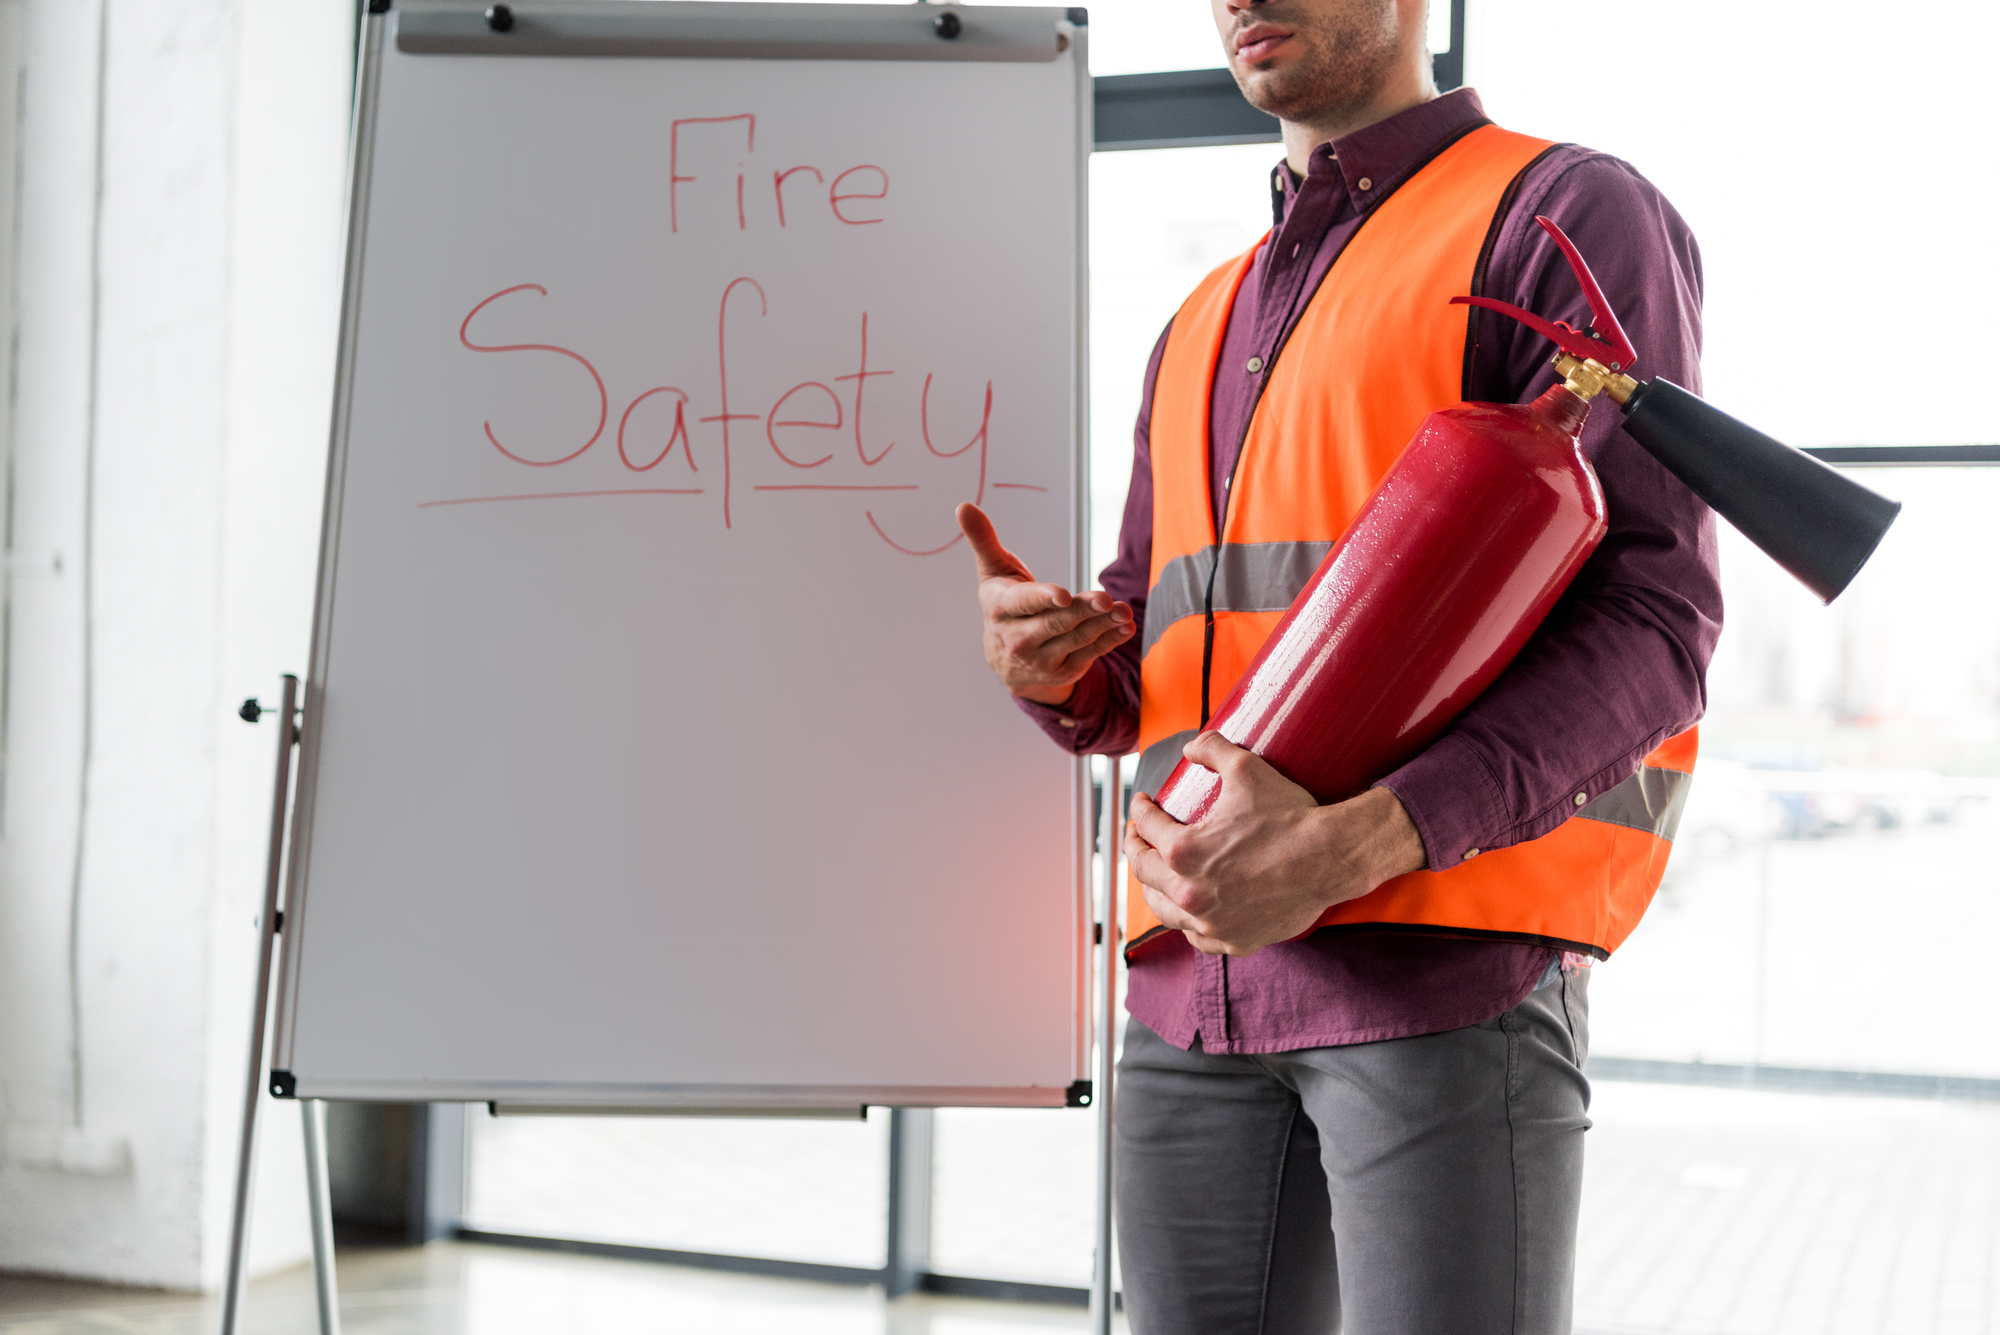 A man holding a fire extinguisher and is wearing a safety gear